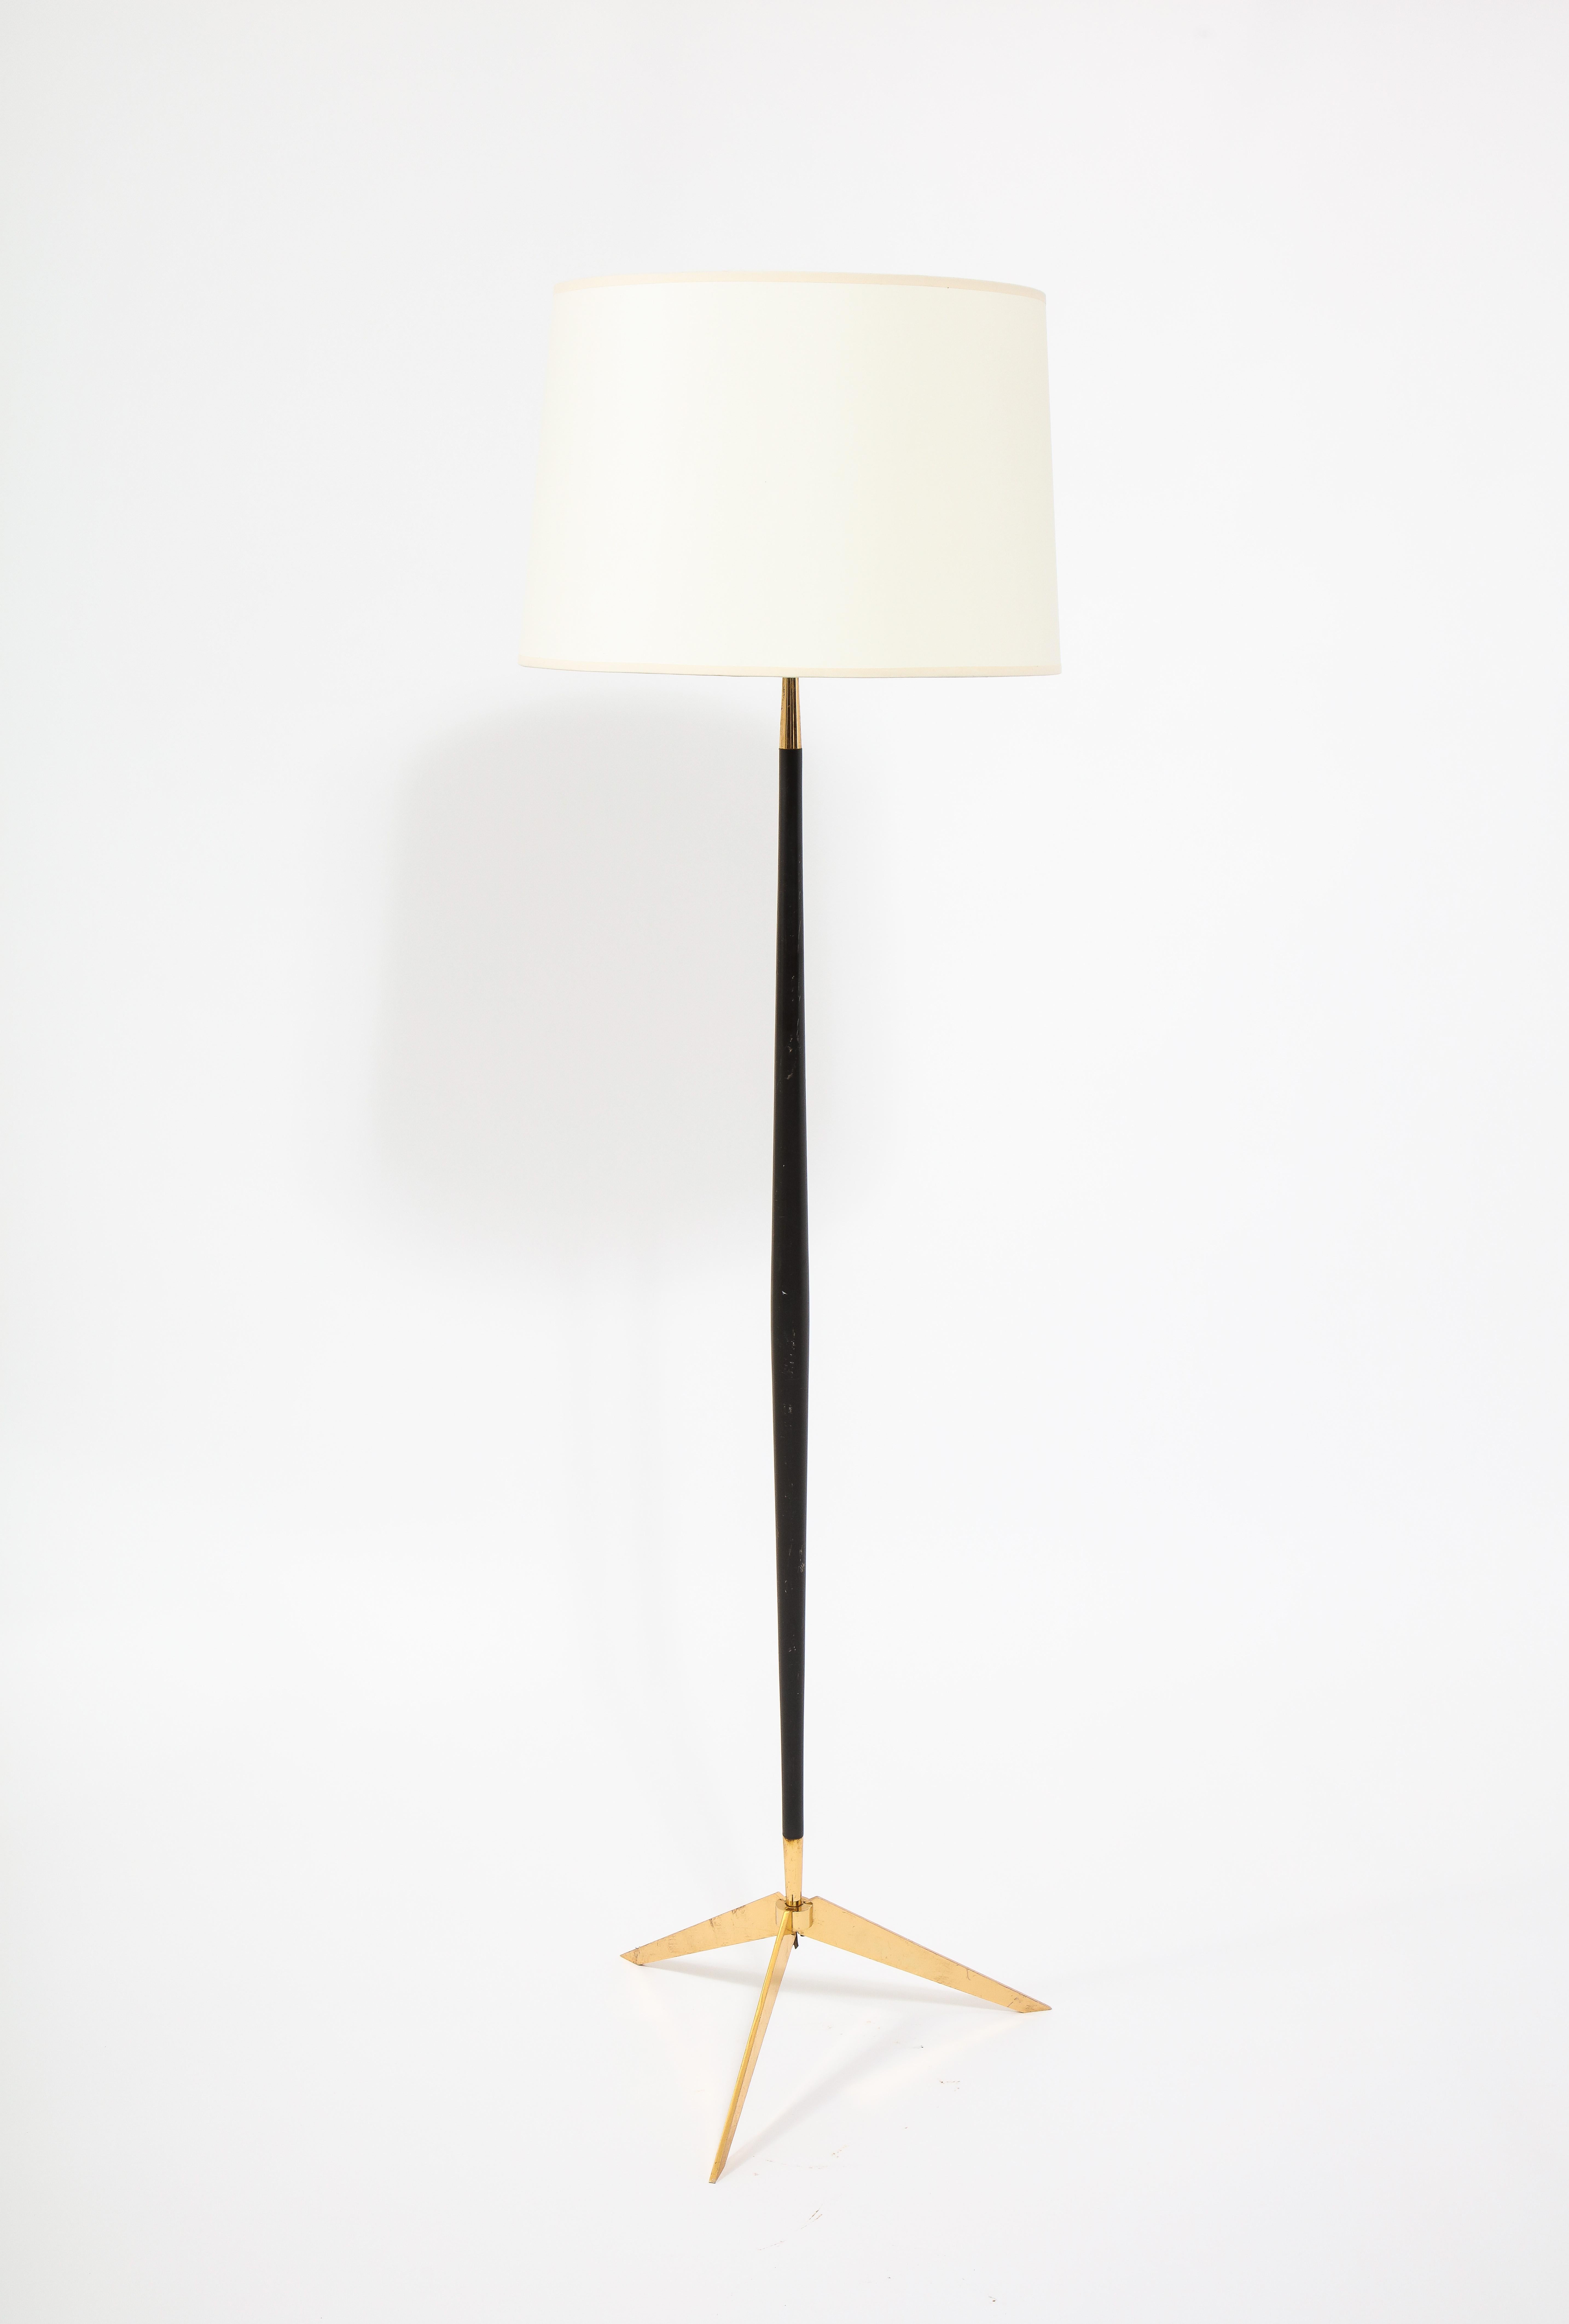 Arlus Tripod Standing Lamp, France 1950's In Good Condition For Sale In New York, NY